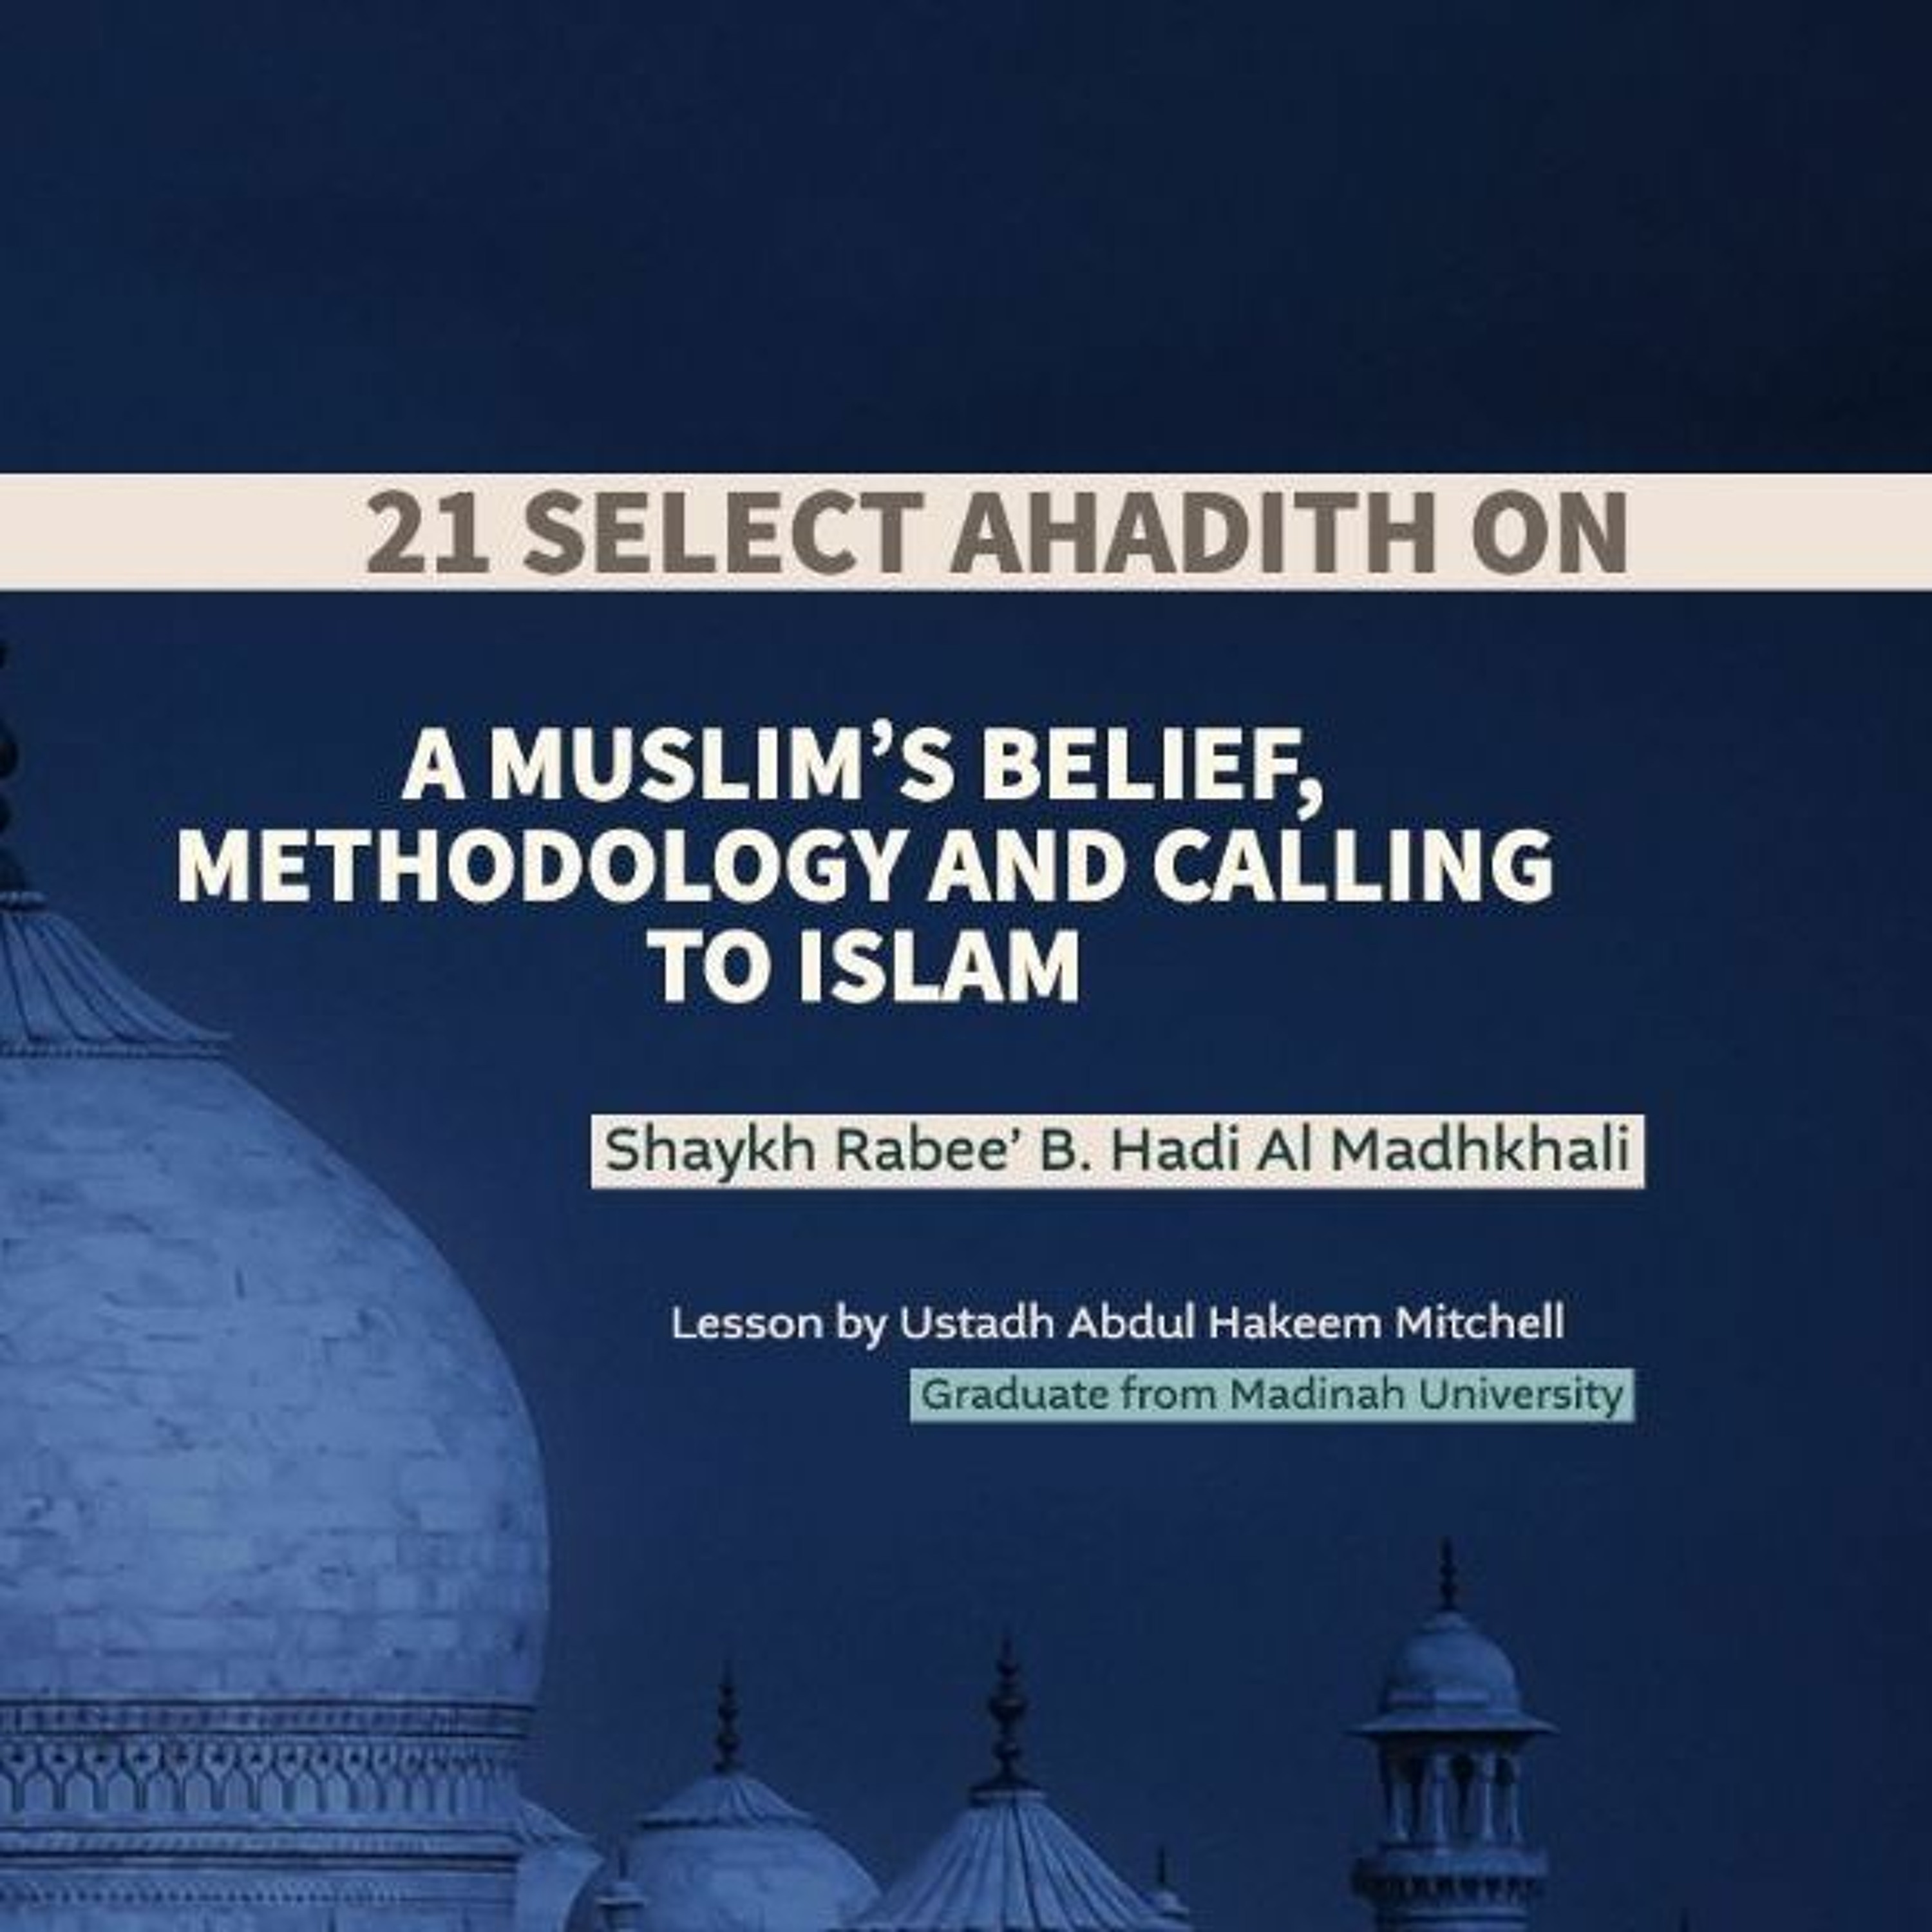 10 - 21 - Selected - Ahadith - On - A-muslim - S-belief - Methodology - And - Calling - To - Islam